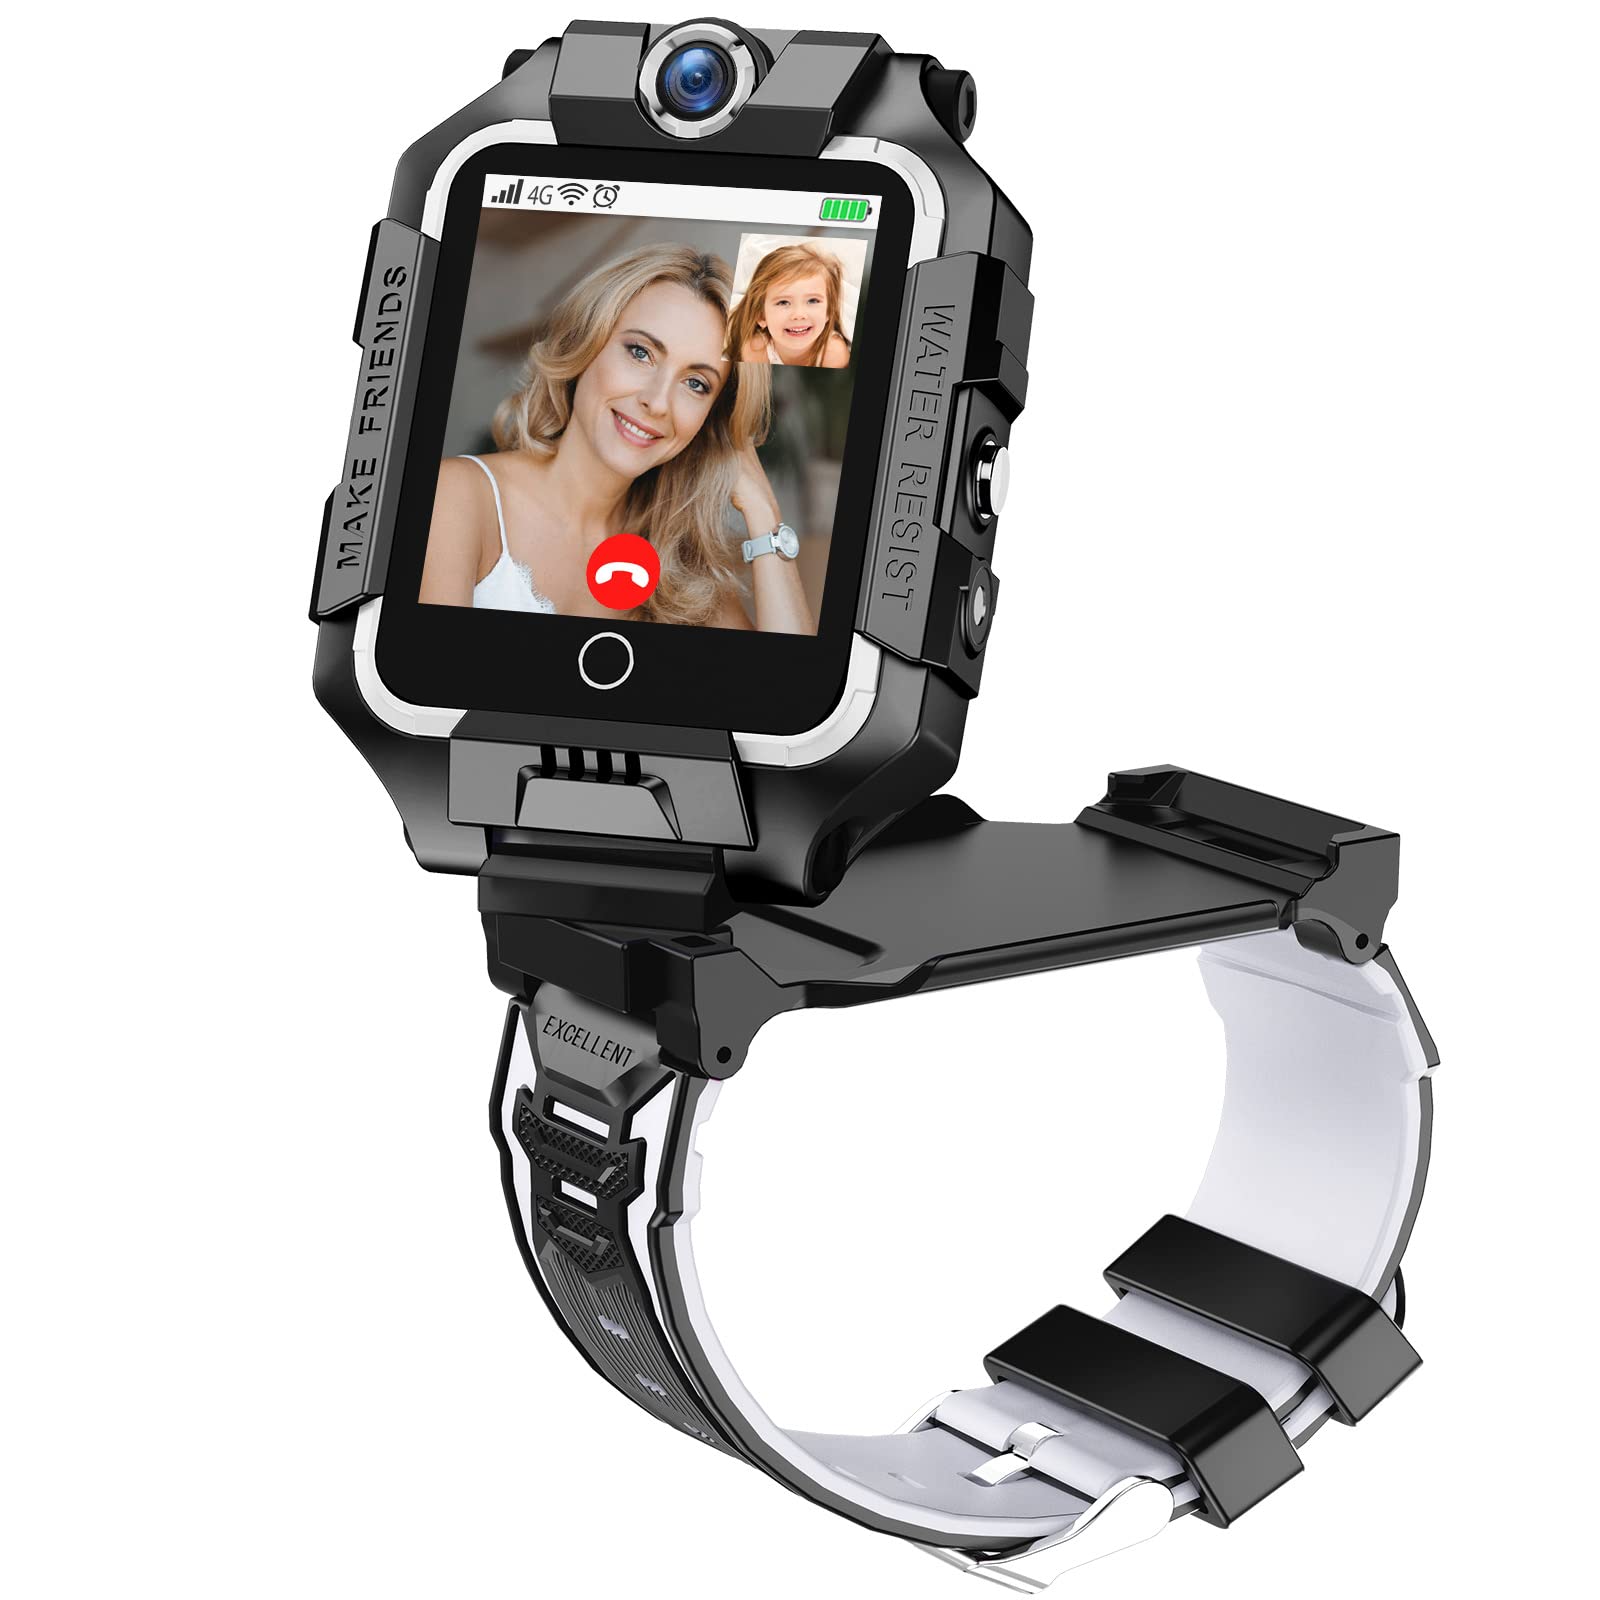 4G Kids Smart Watch w GPS Tracker,2 Way Voice & Video Call SOS Dual Cameras,Face Unlock,SMS,Chat,Smartwatch for Kids 4-15 Years Girls Boys Smartpho...